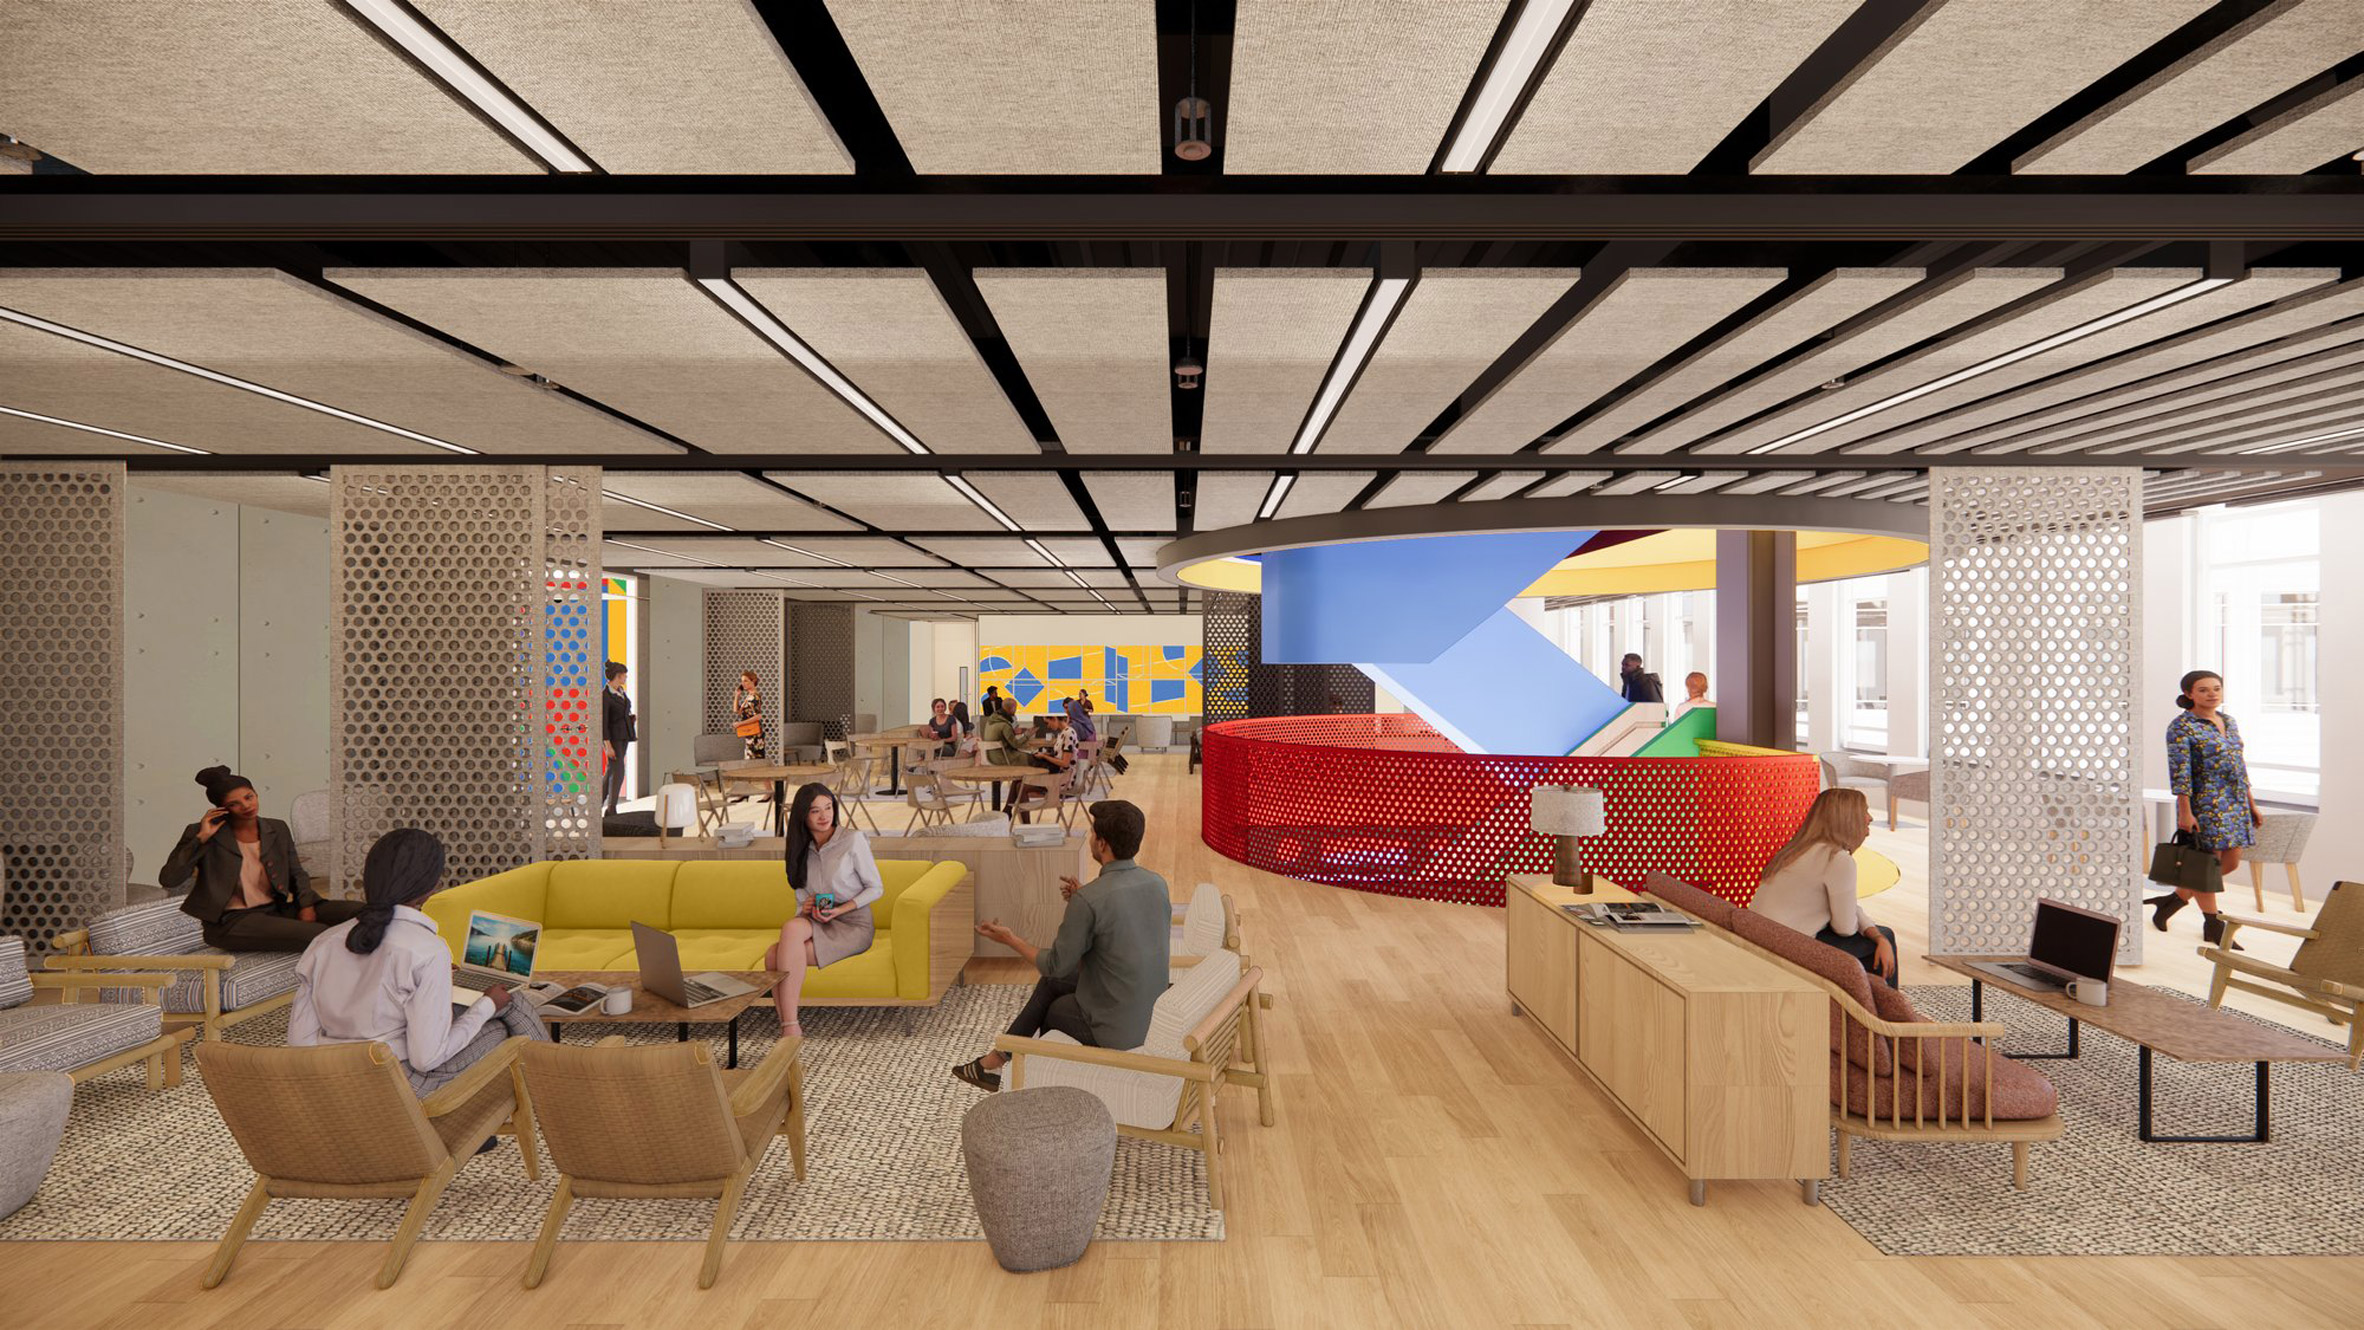 Rendering of a floor landing at Google's Central Saint Giles offices, showing a red feature staircase and buzzing lounge area